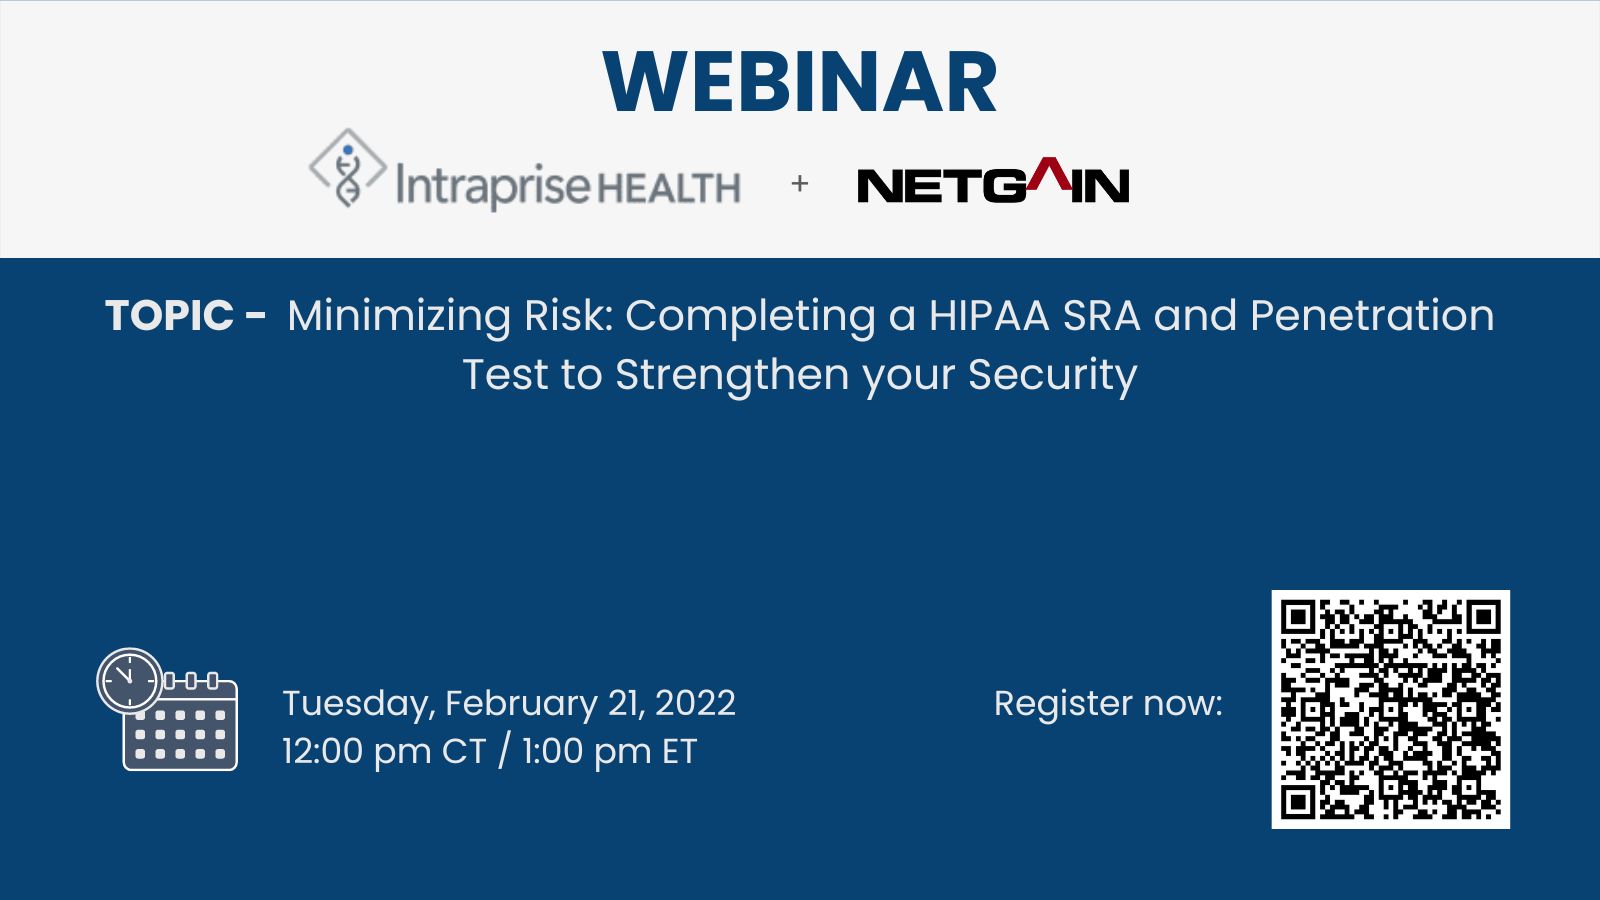 Minimizing Risk: Completing a HIPAA SRA and Penetration Test to Strengthen Your Security